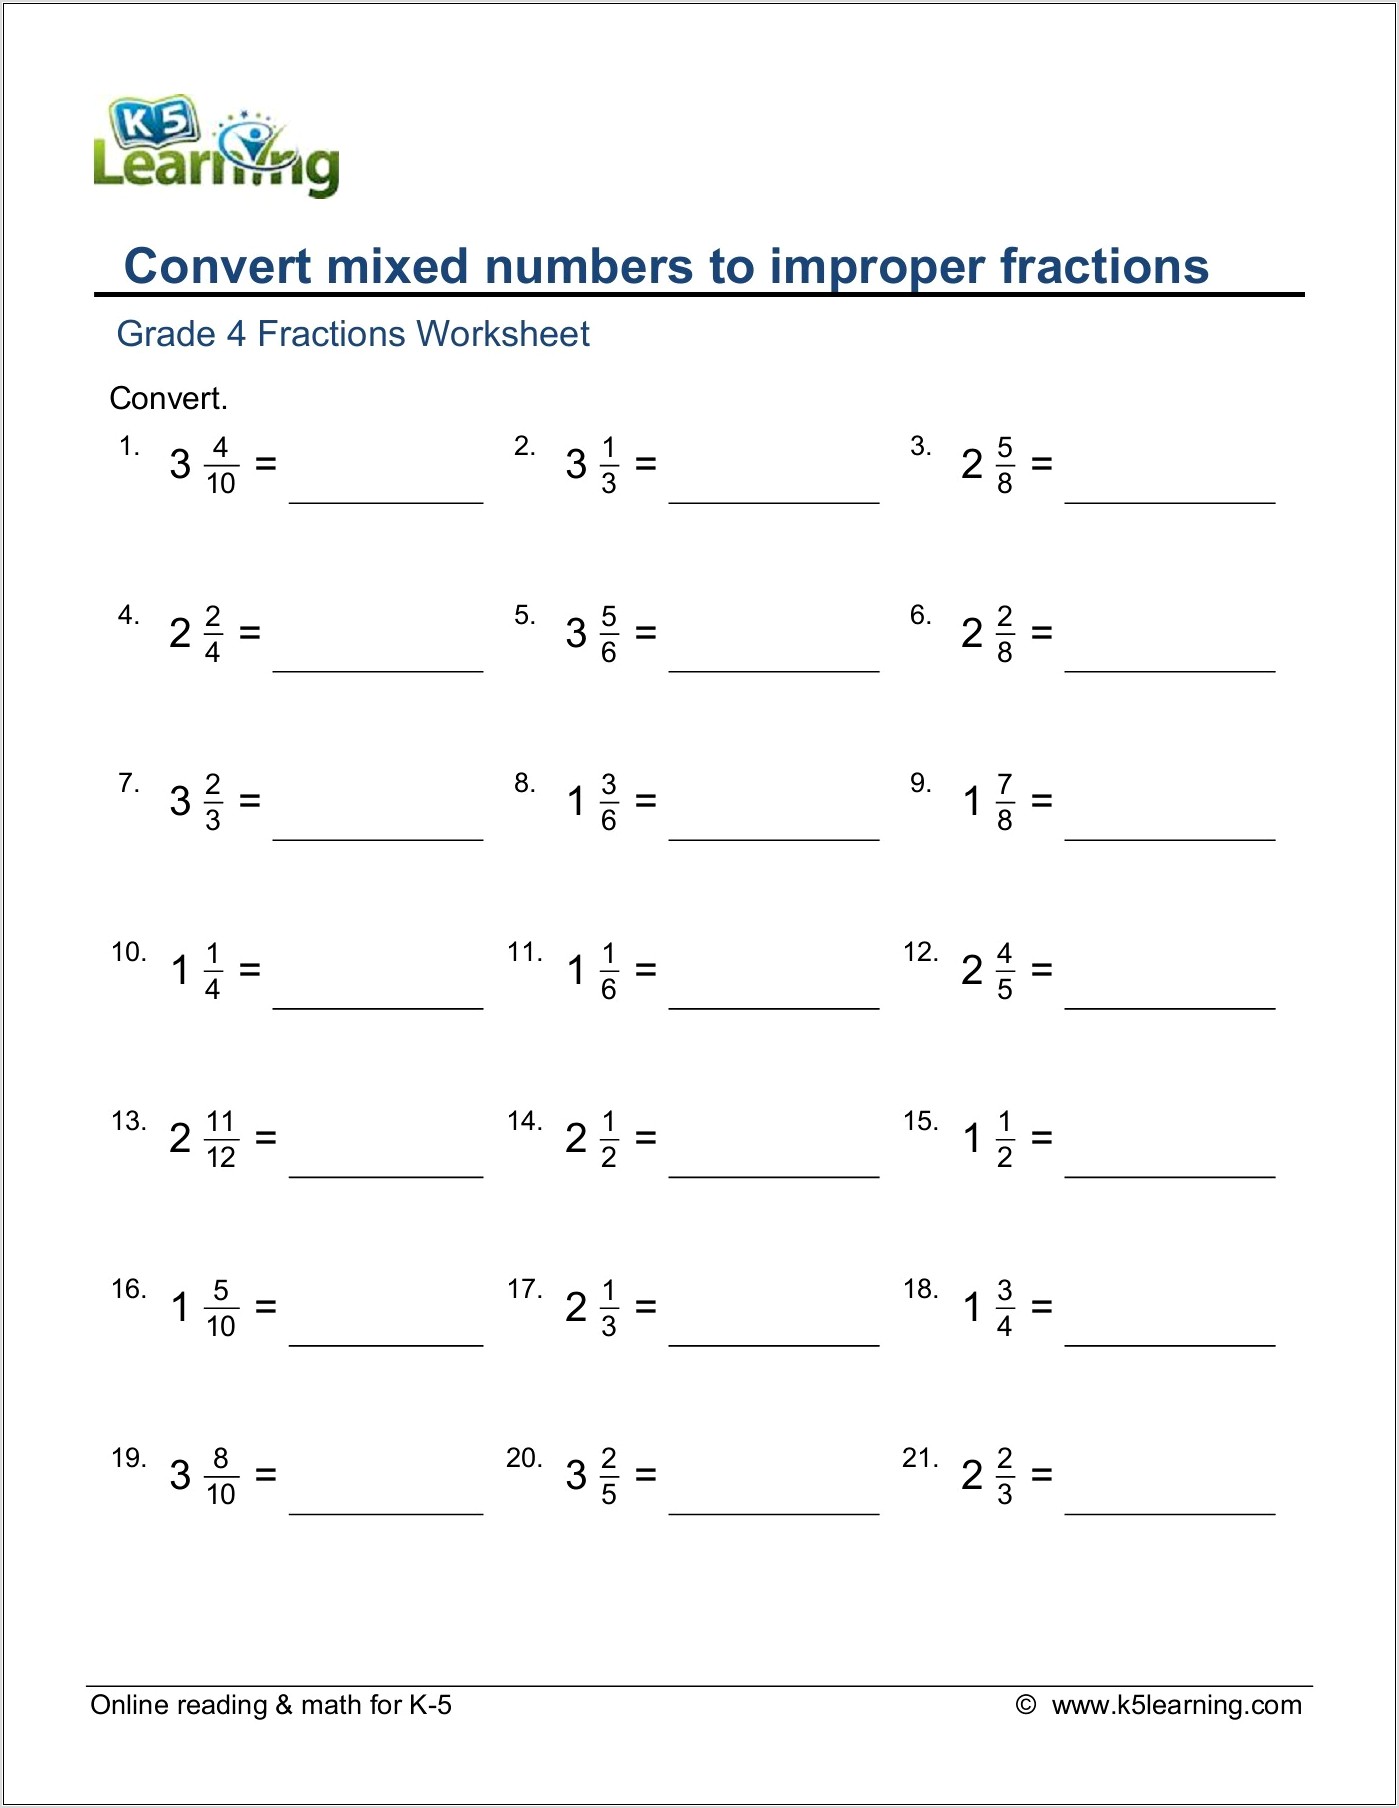 Renaming Fractions And Mixed Numbers Worksheet